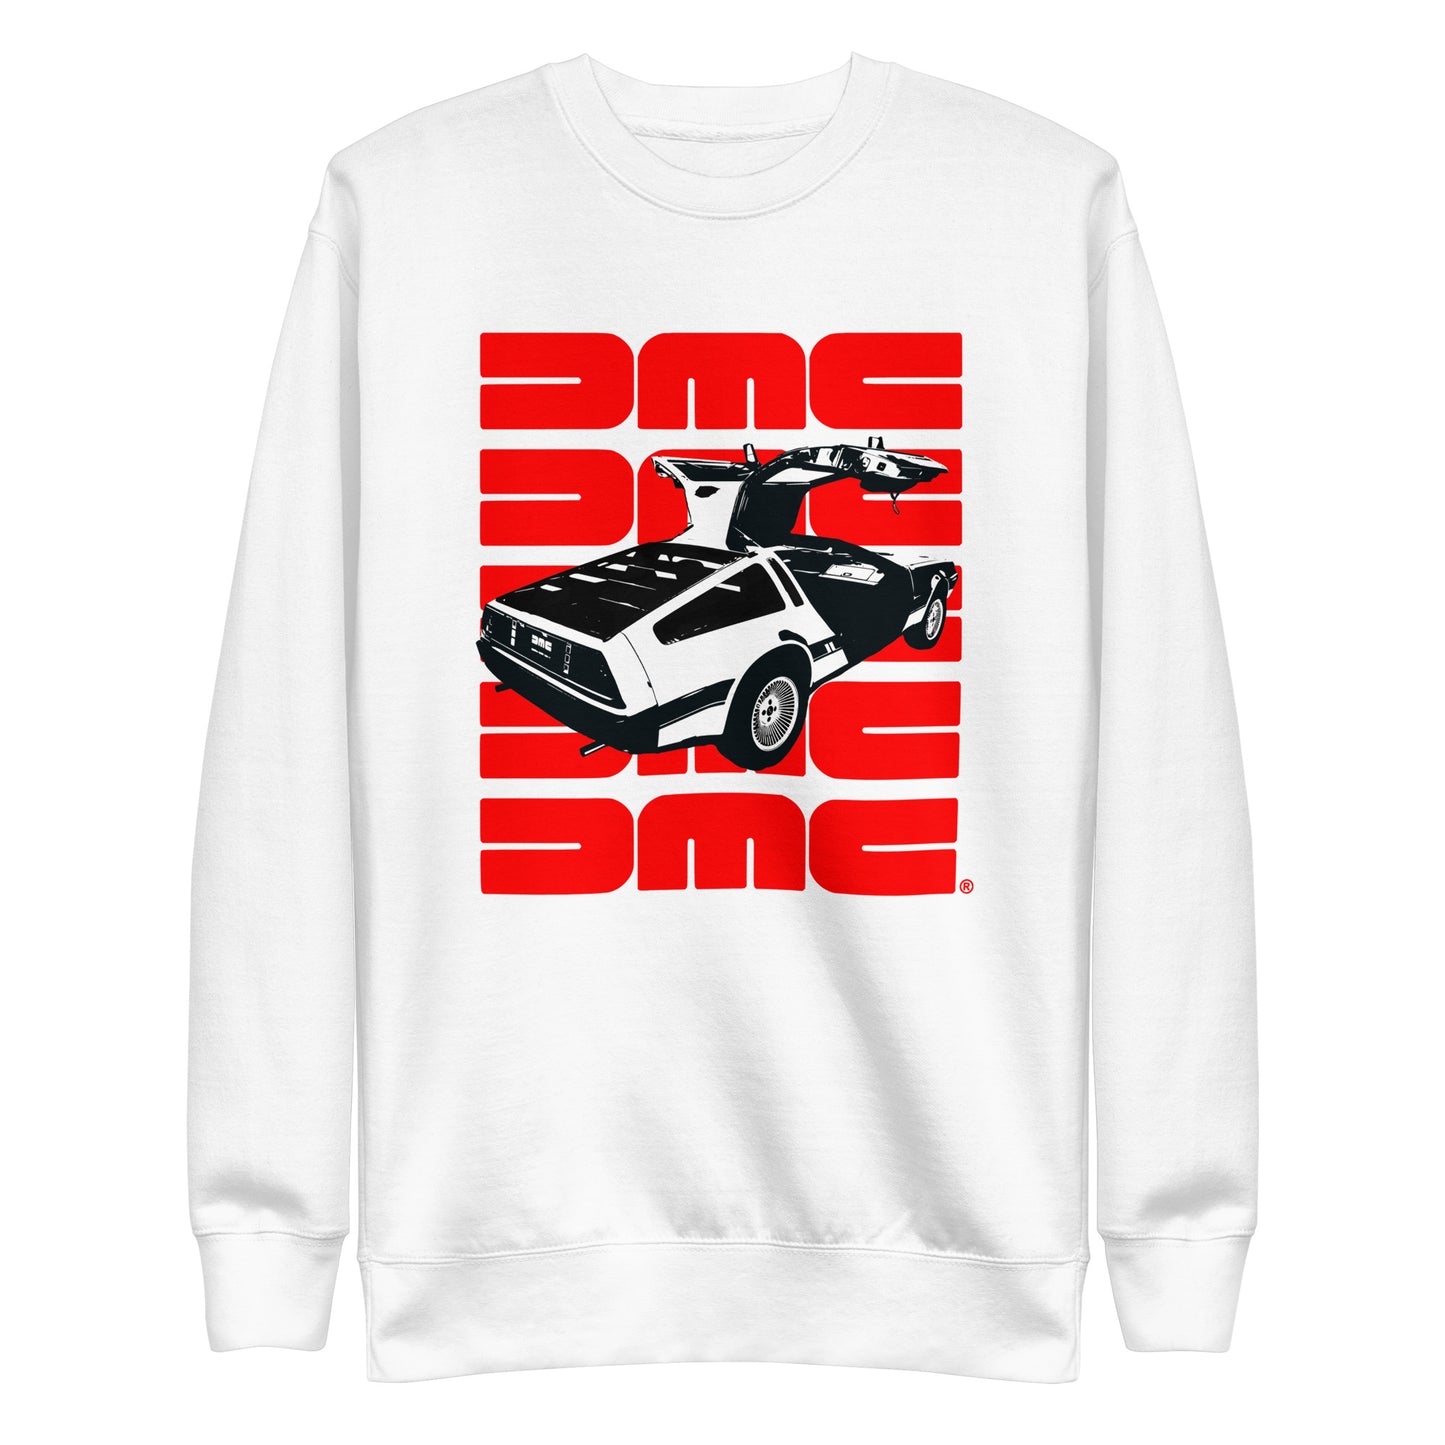 Black, White, and Red All Over Unisex Sweatshirt